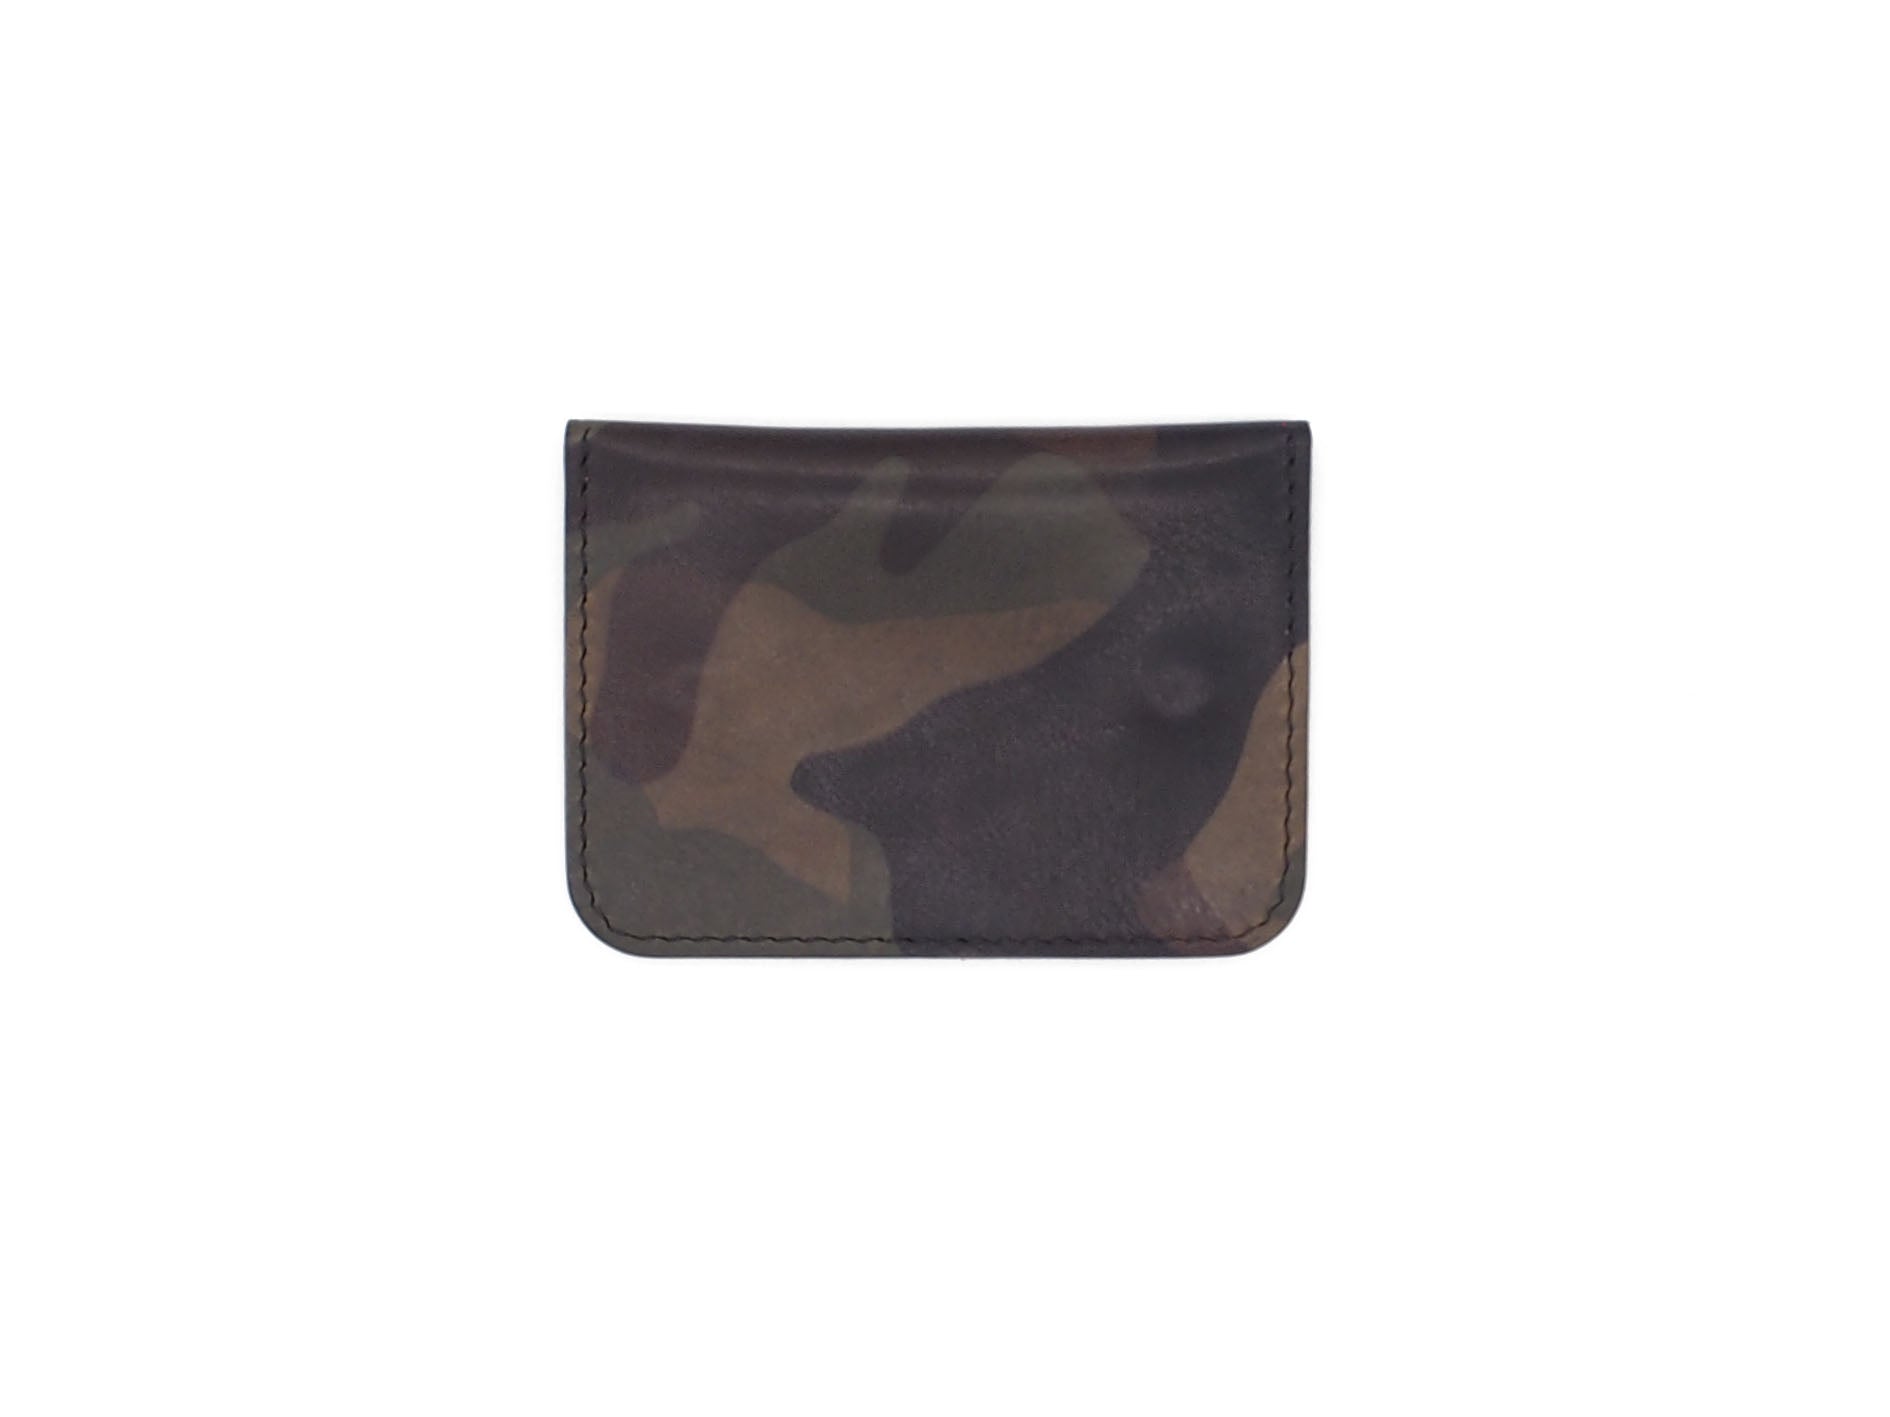 Utility Pocket - Snap Pouch Wallet In Woodland Camo